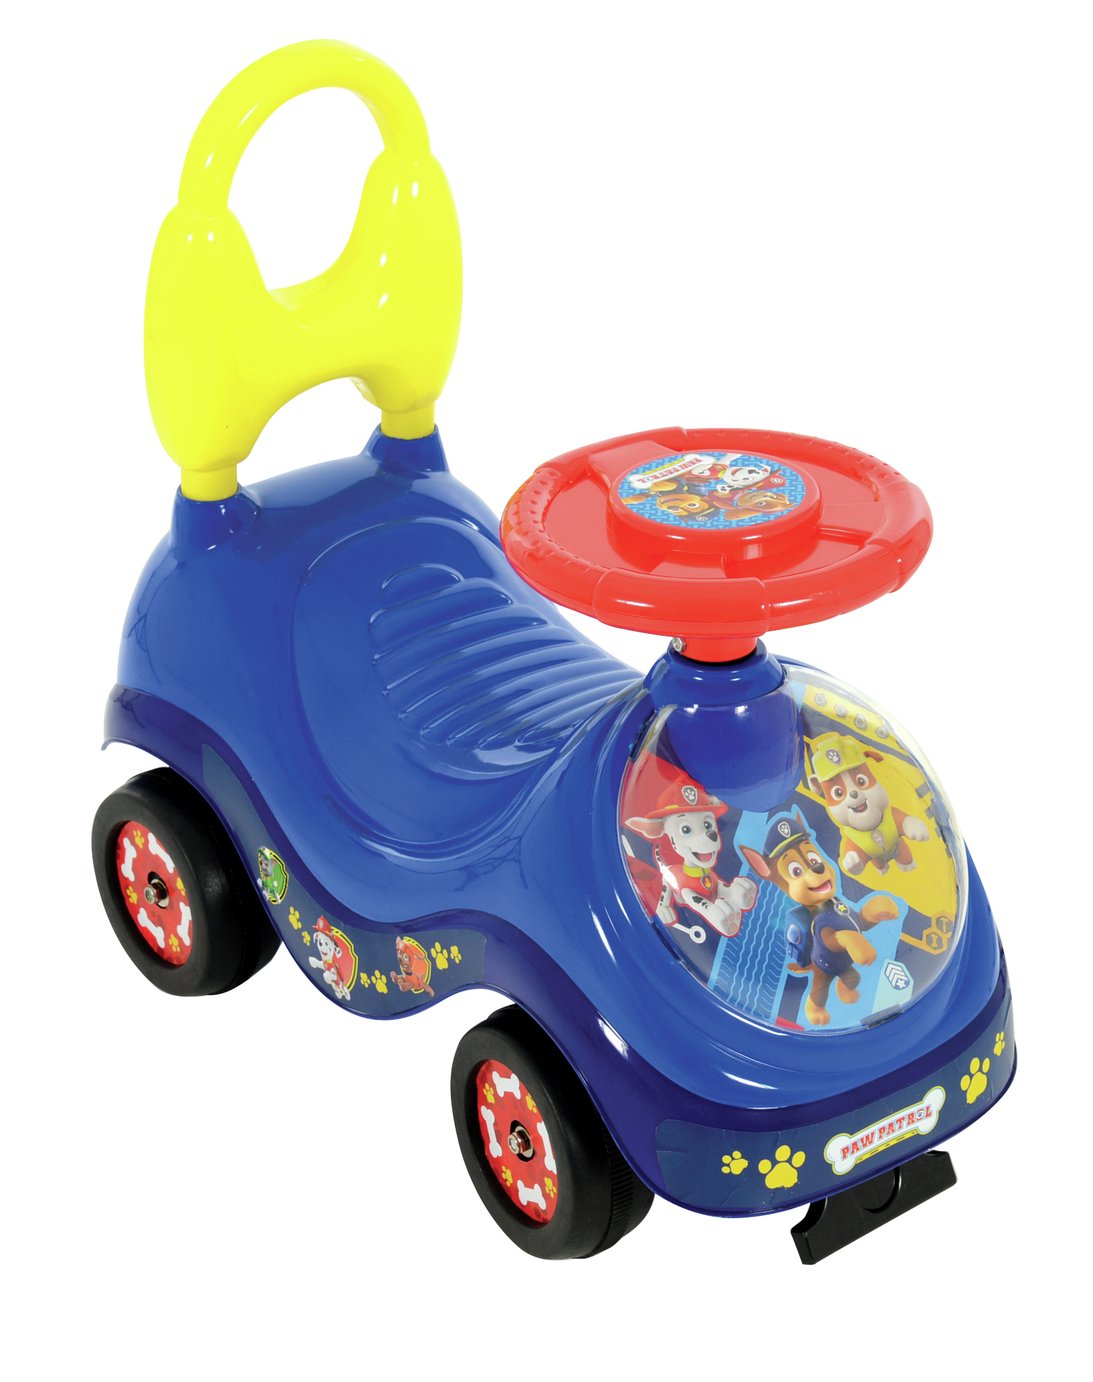 Paw Patrol My First Sit & Ride Review